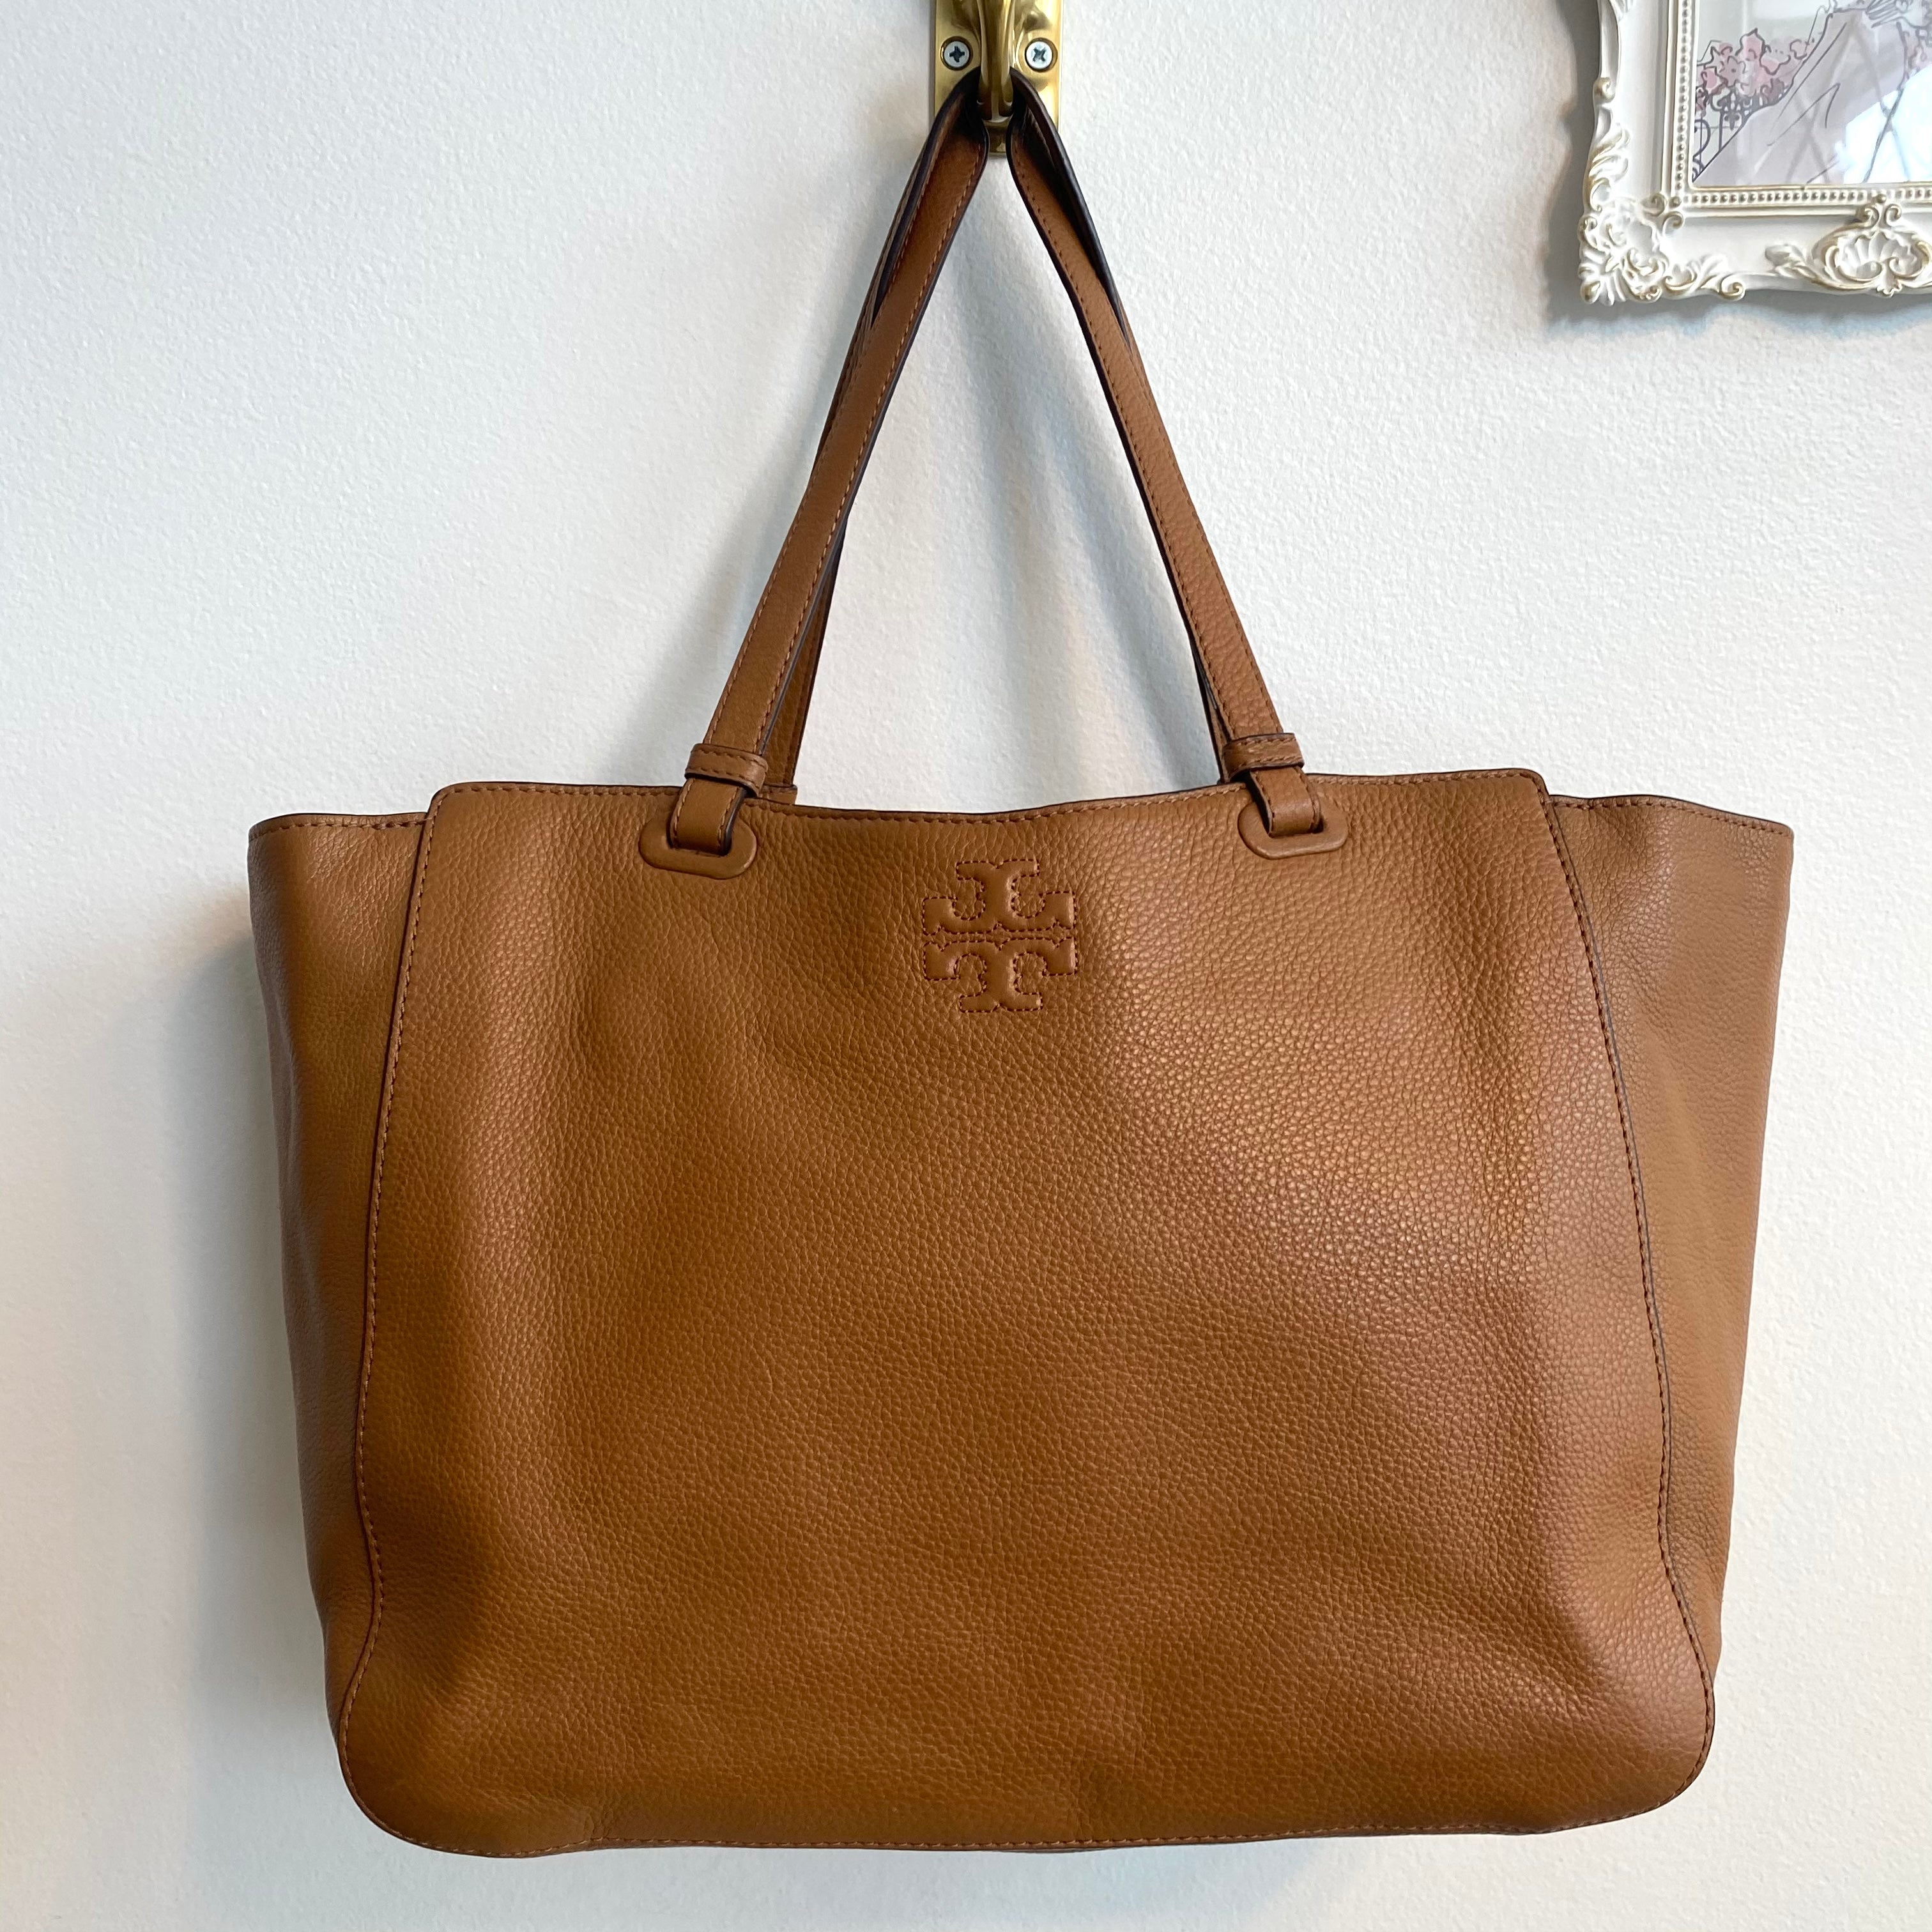 Authentic TORY BURCH Cognac Leather Diaper/Tote Bag – Valamode